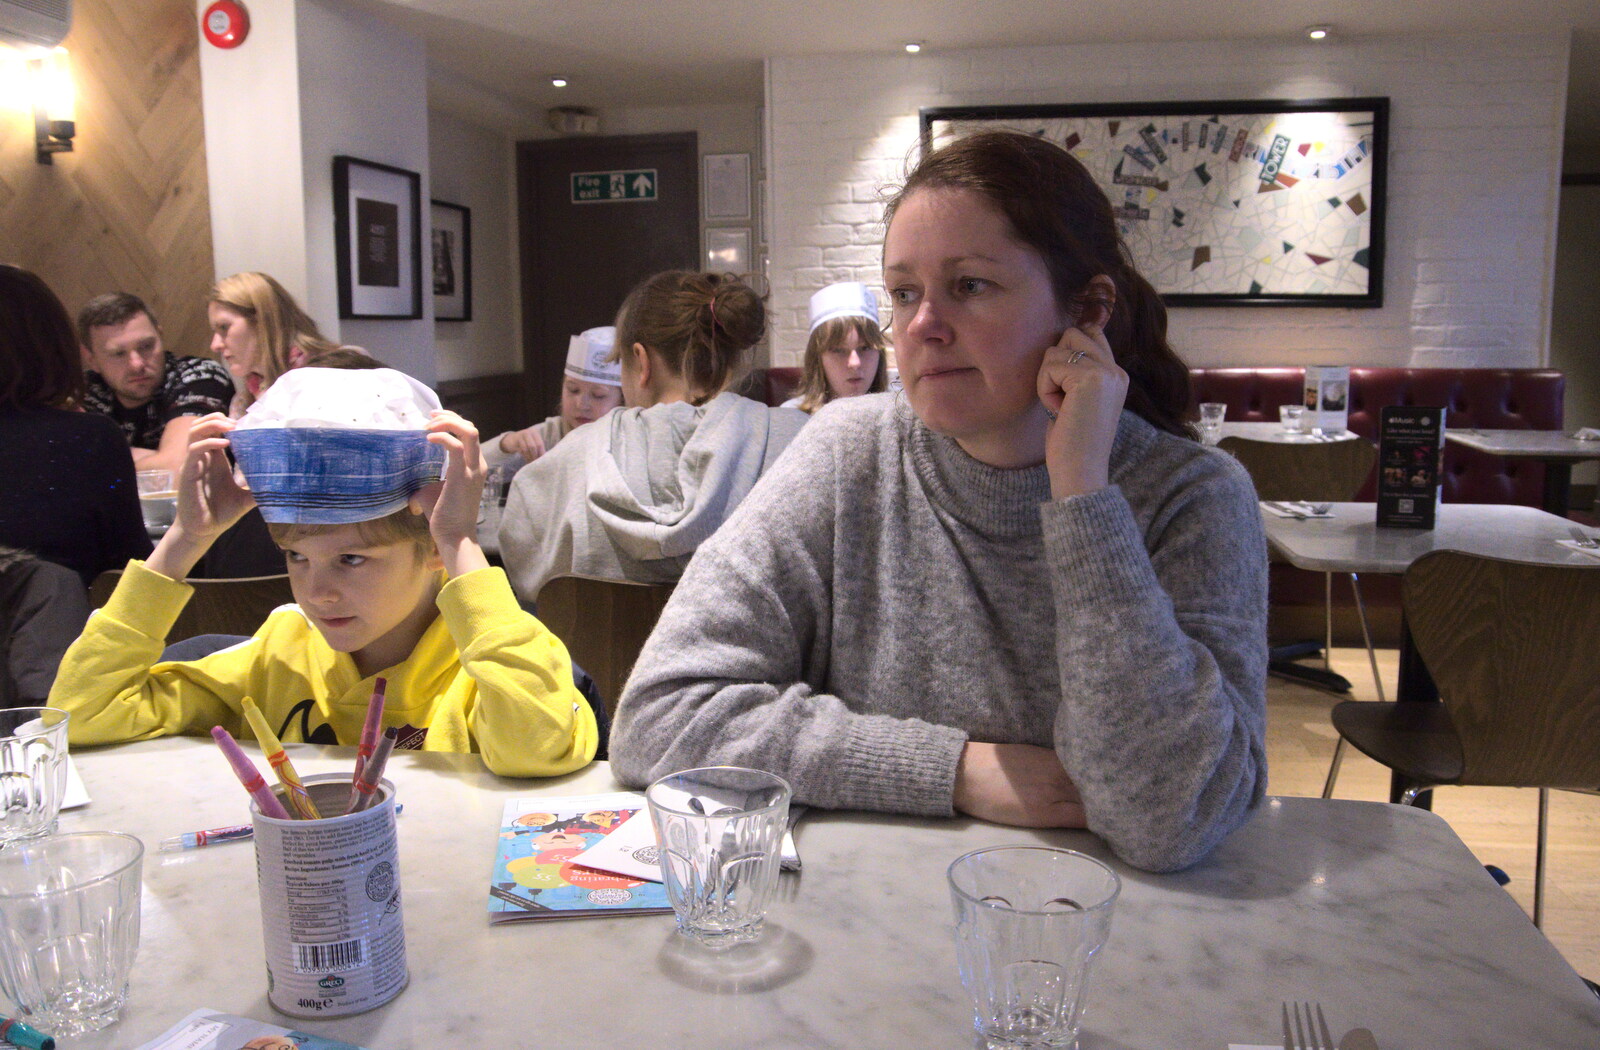 Harry and Isobel in Pizza Express from HMS Belfast and the South Bank, Southwark, London - 17th February 2020